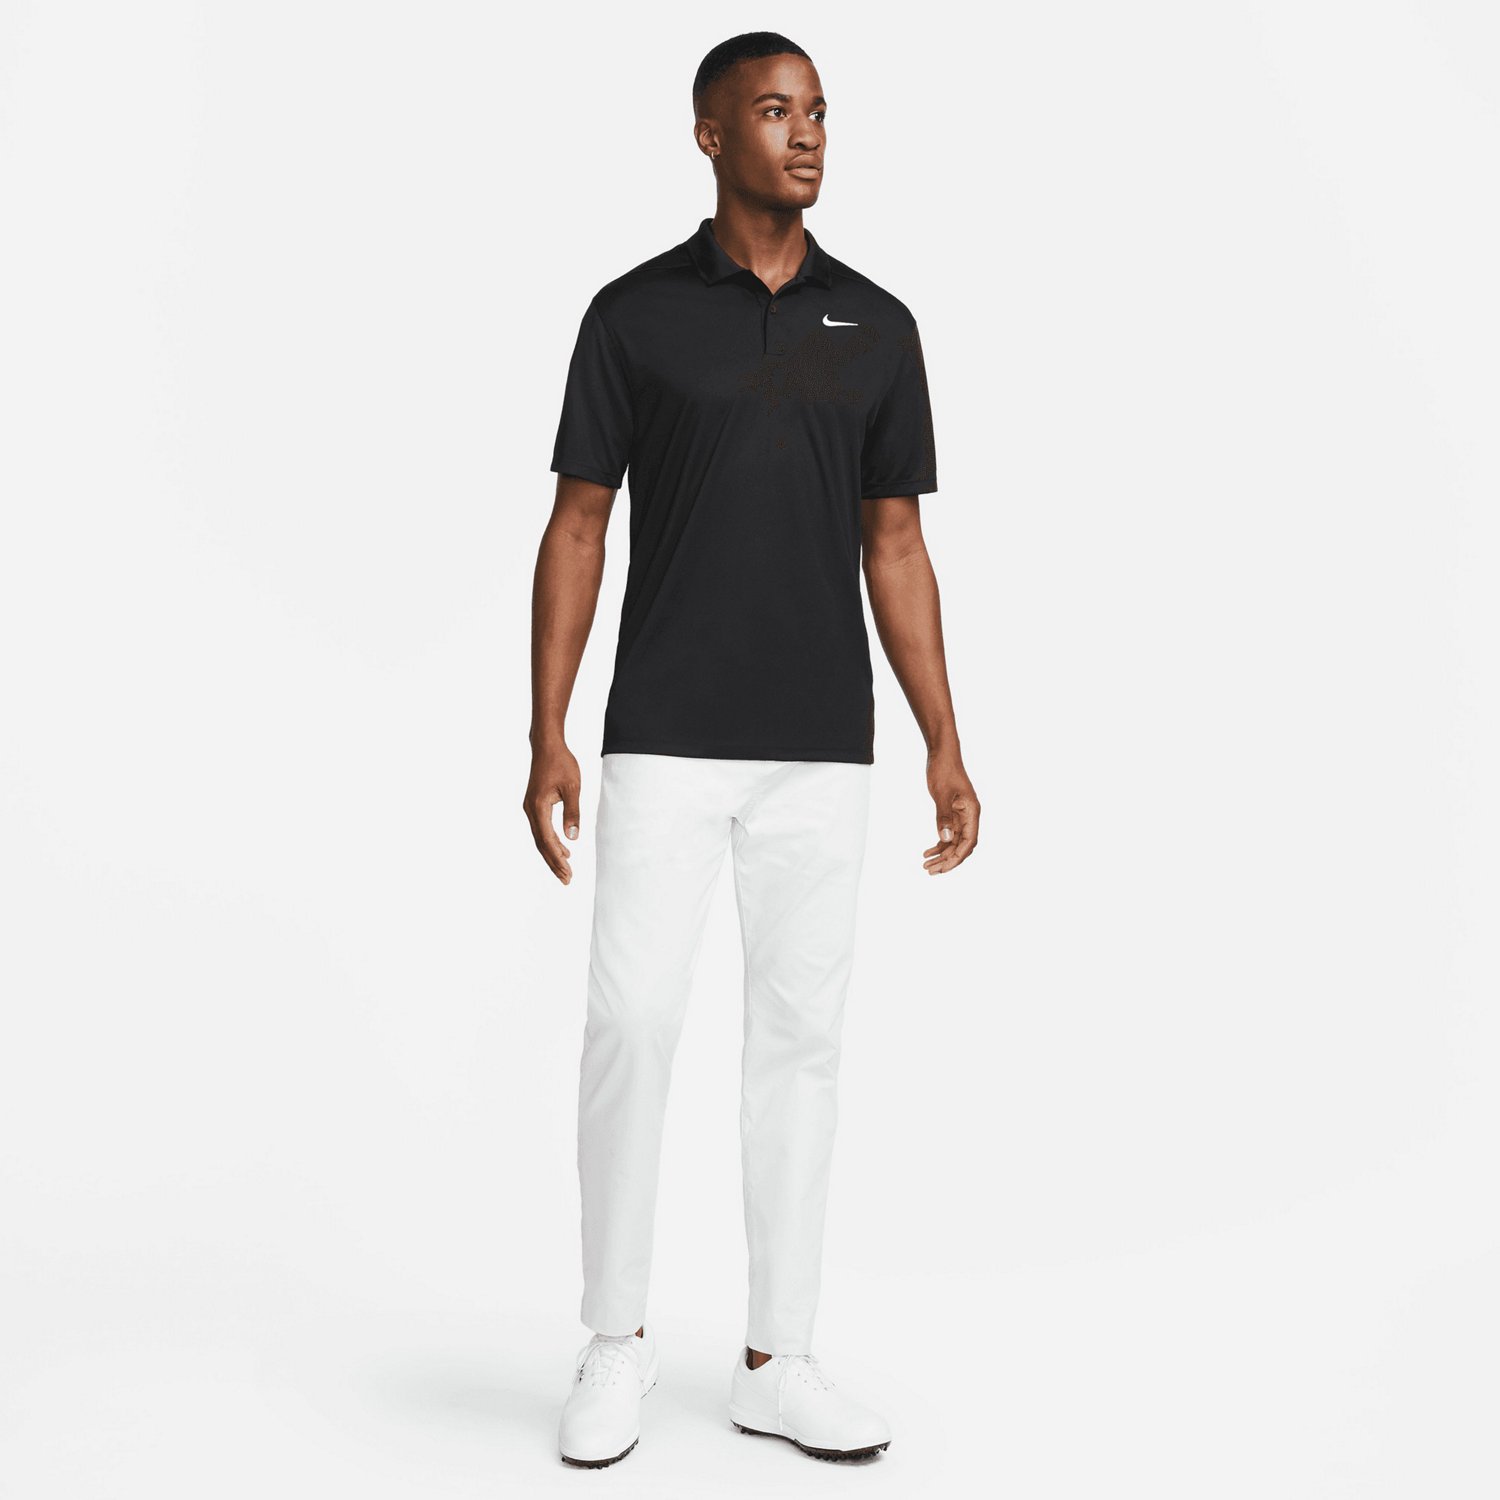 Nike Men's Dri-FIT Victory Polo Shirt | Free Shipping at Academy